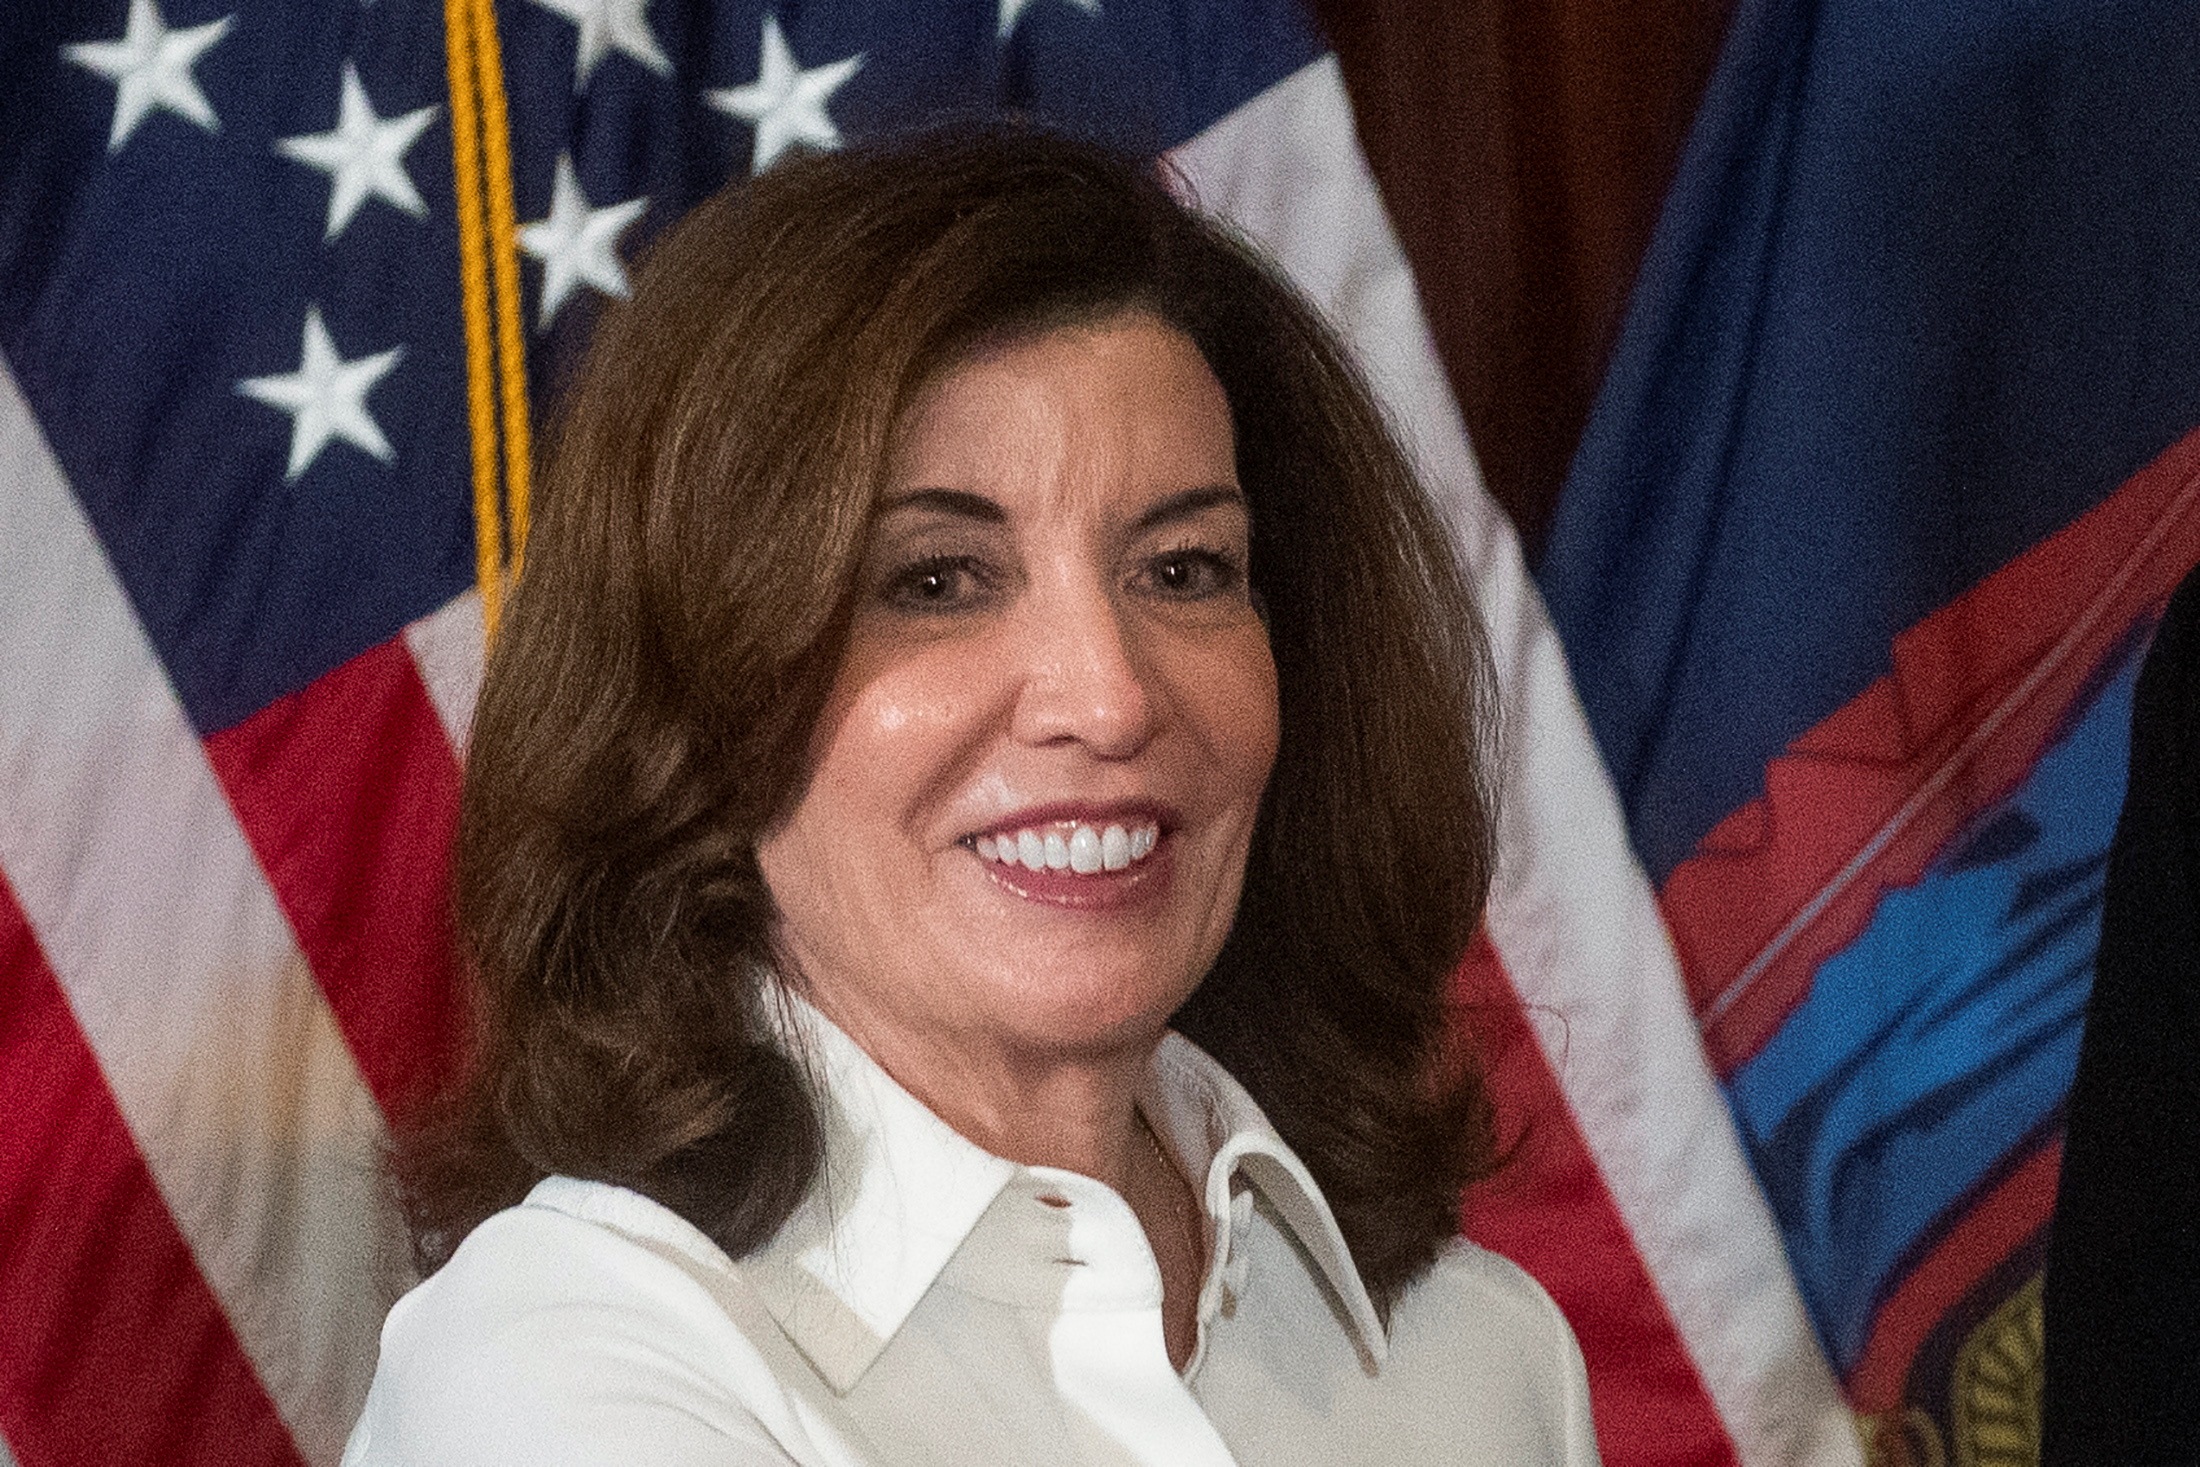 New York Governor Kathy Hochul reacts during a swearing-in ceremony at the New York State Capitol, in Albany, New York